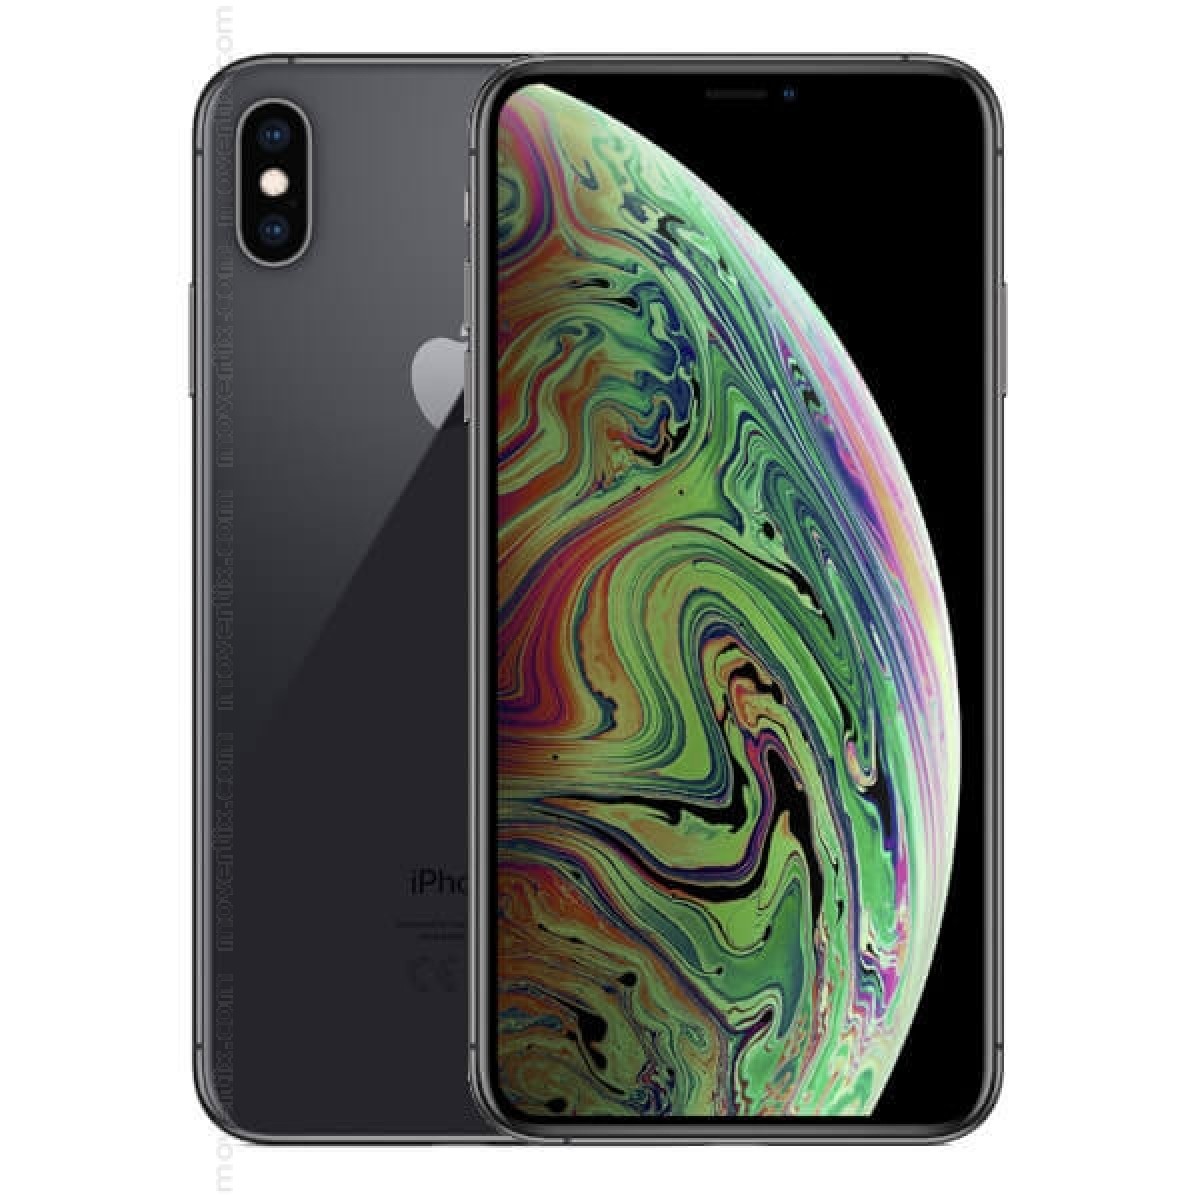 Iphone Xs Max Space Grey 256gb 0190198784193 Movertix Mobile